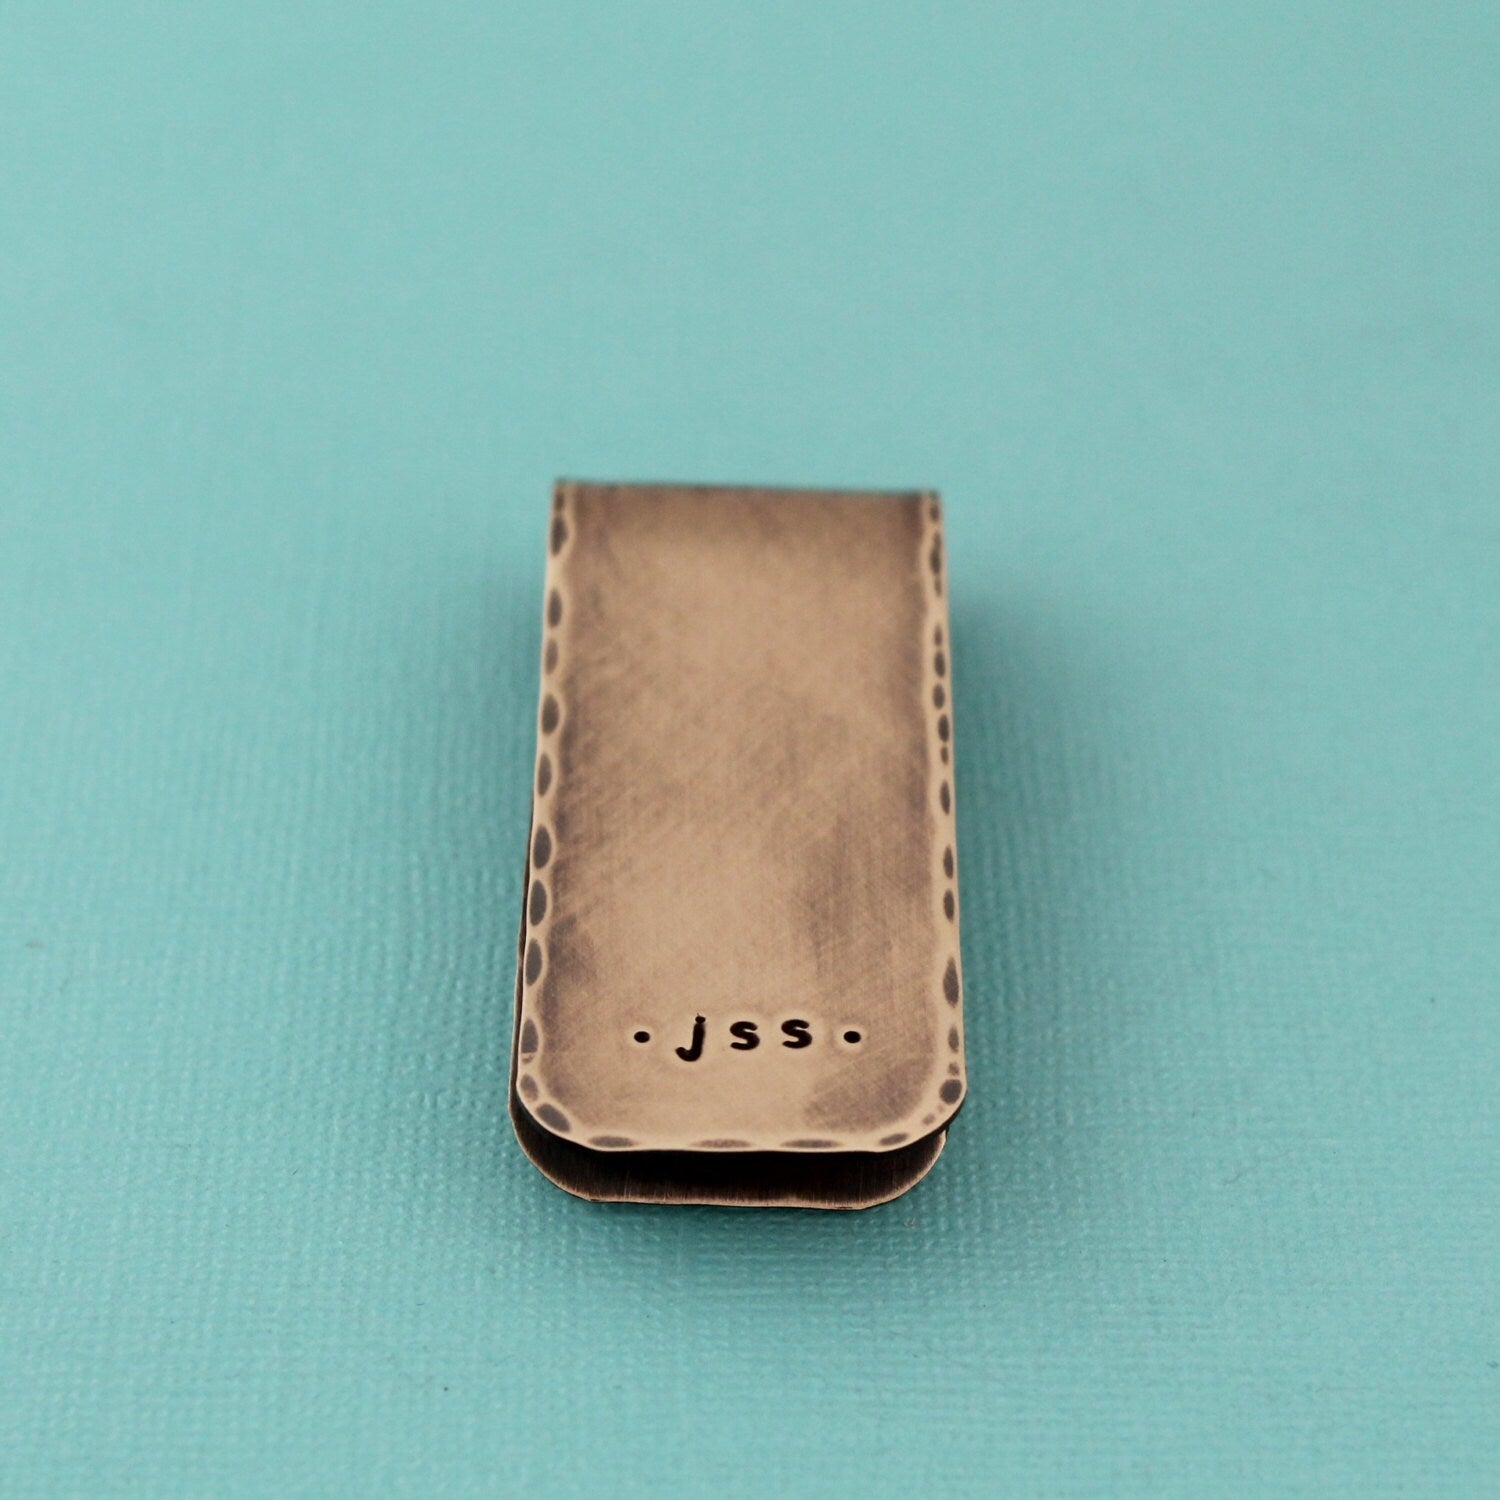 Personalized Money Clip, Monogram Money Clip, Gifts for Him, Father's Day Gift, Groomsmen Gift, Monogram Groom Gift, Gifts for Dad